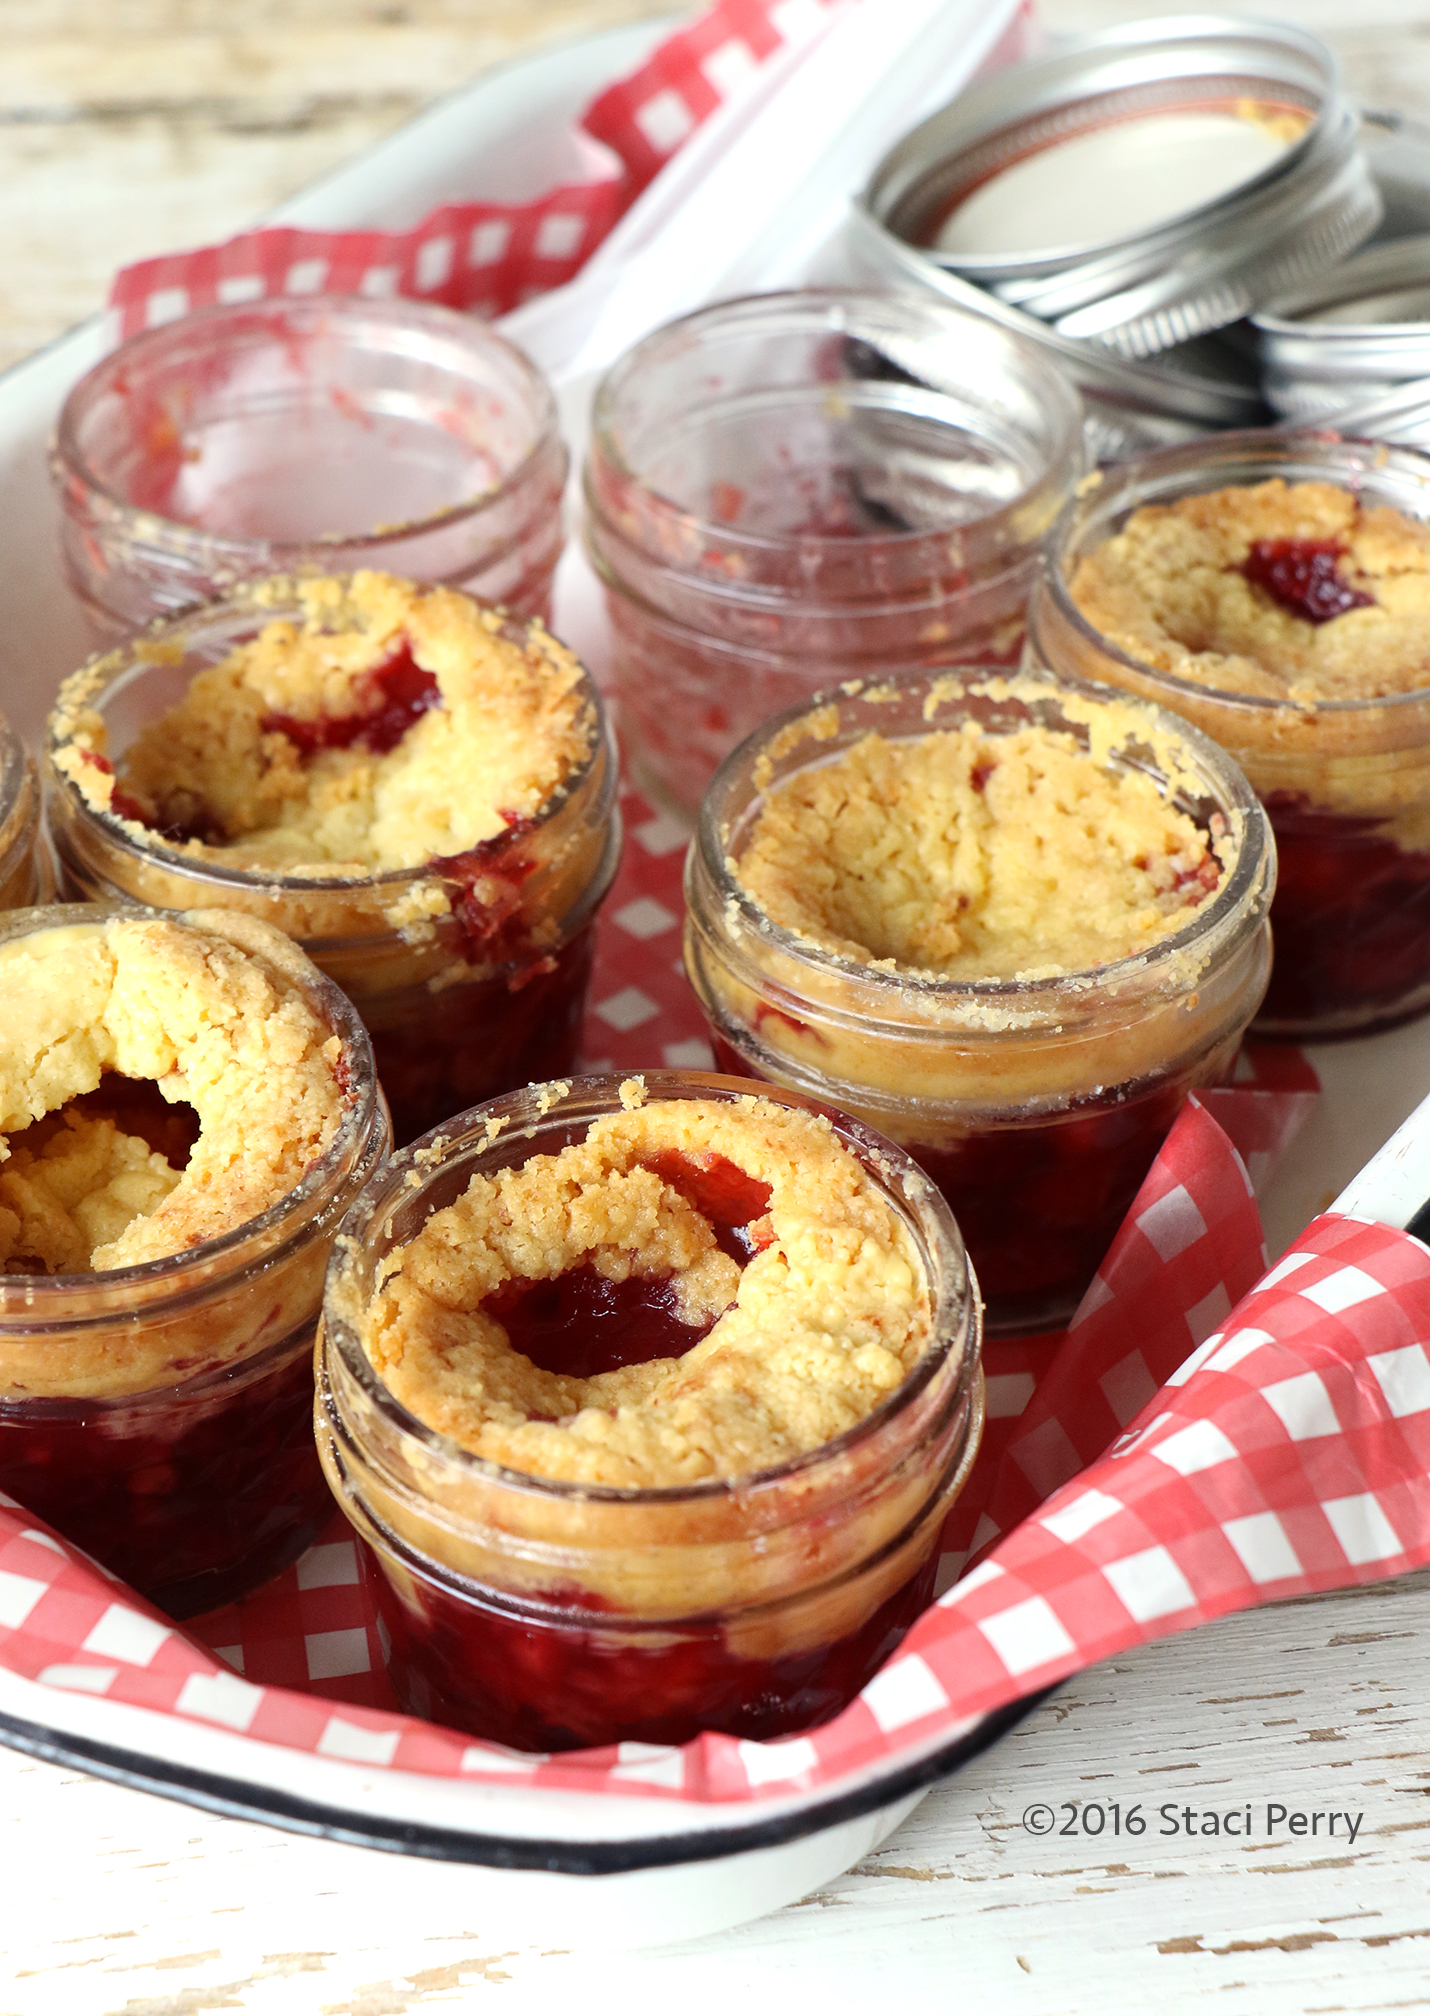 Life Isn’t Always a Picnic but Pack Cherry Crunchobblerumble Jars in Your Basket Anyway